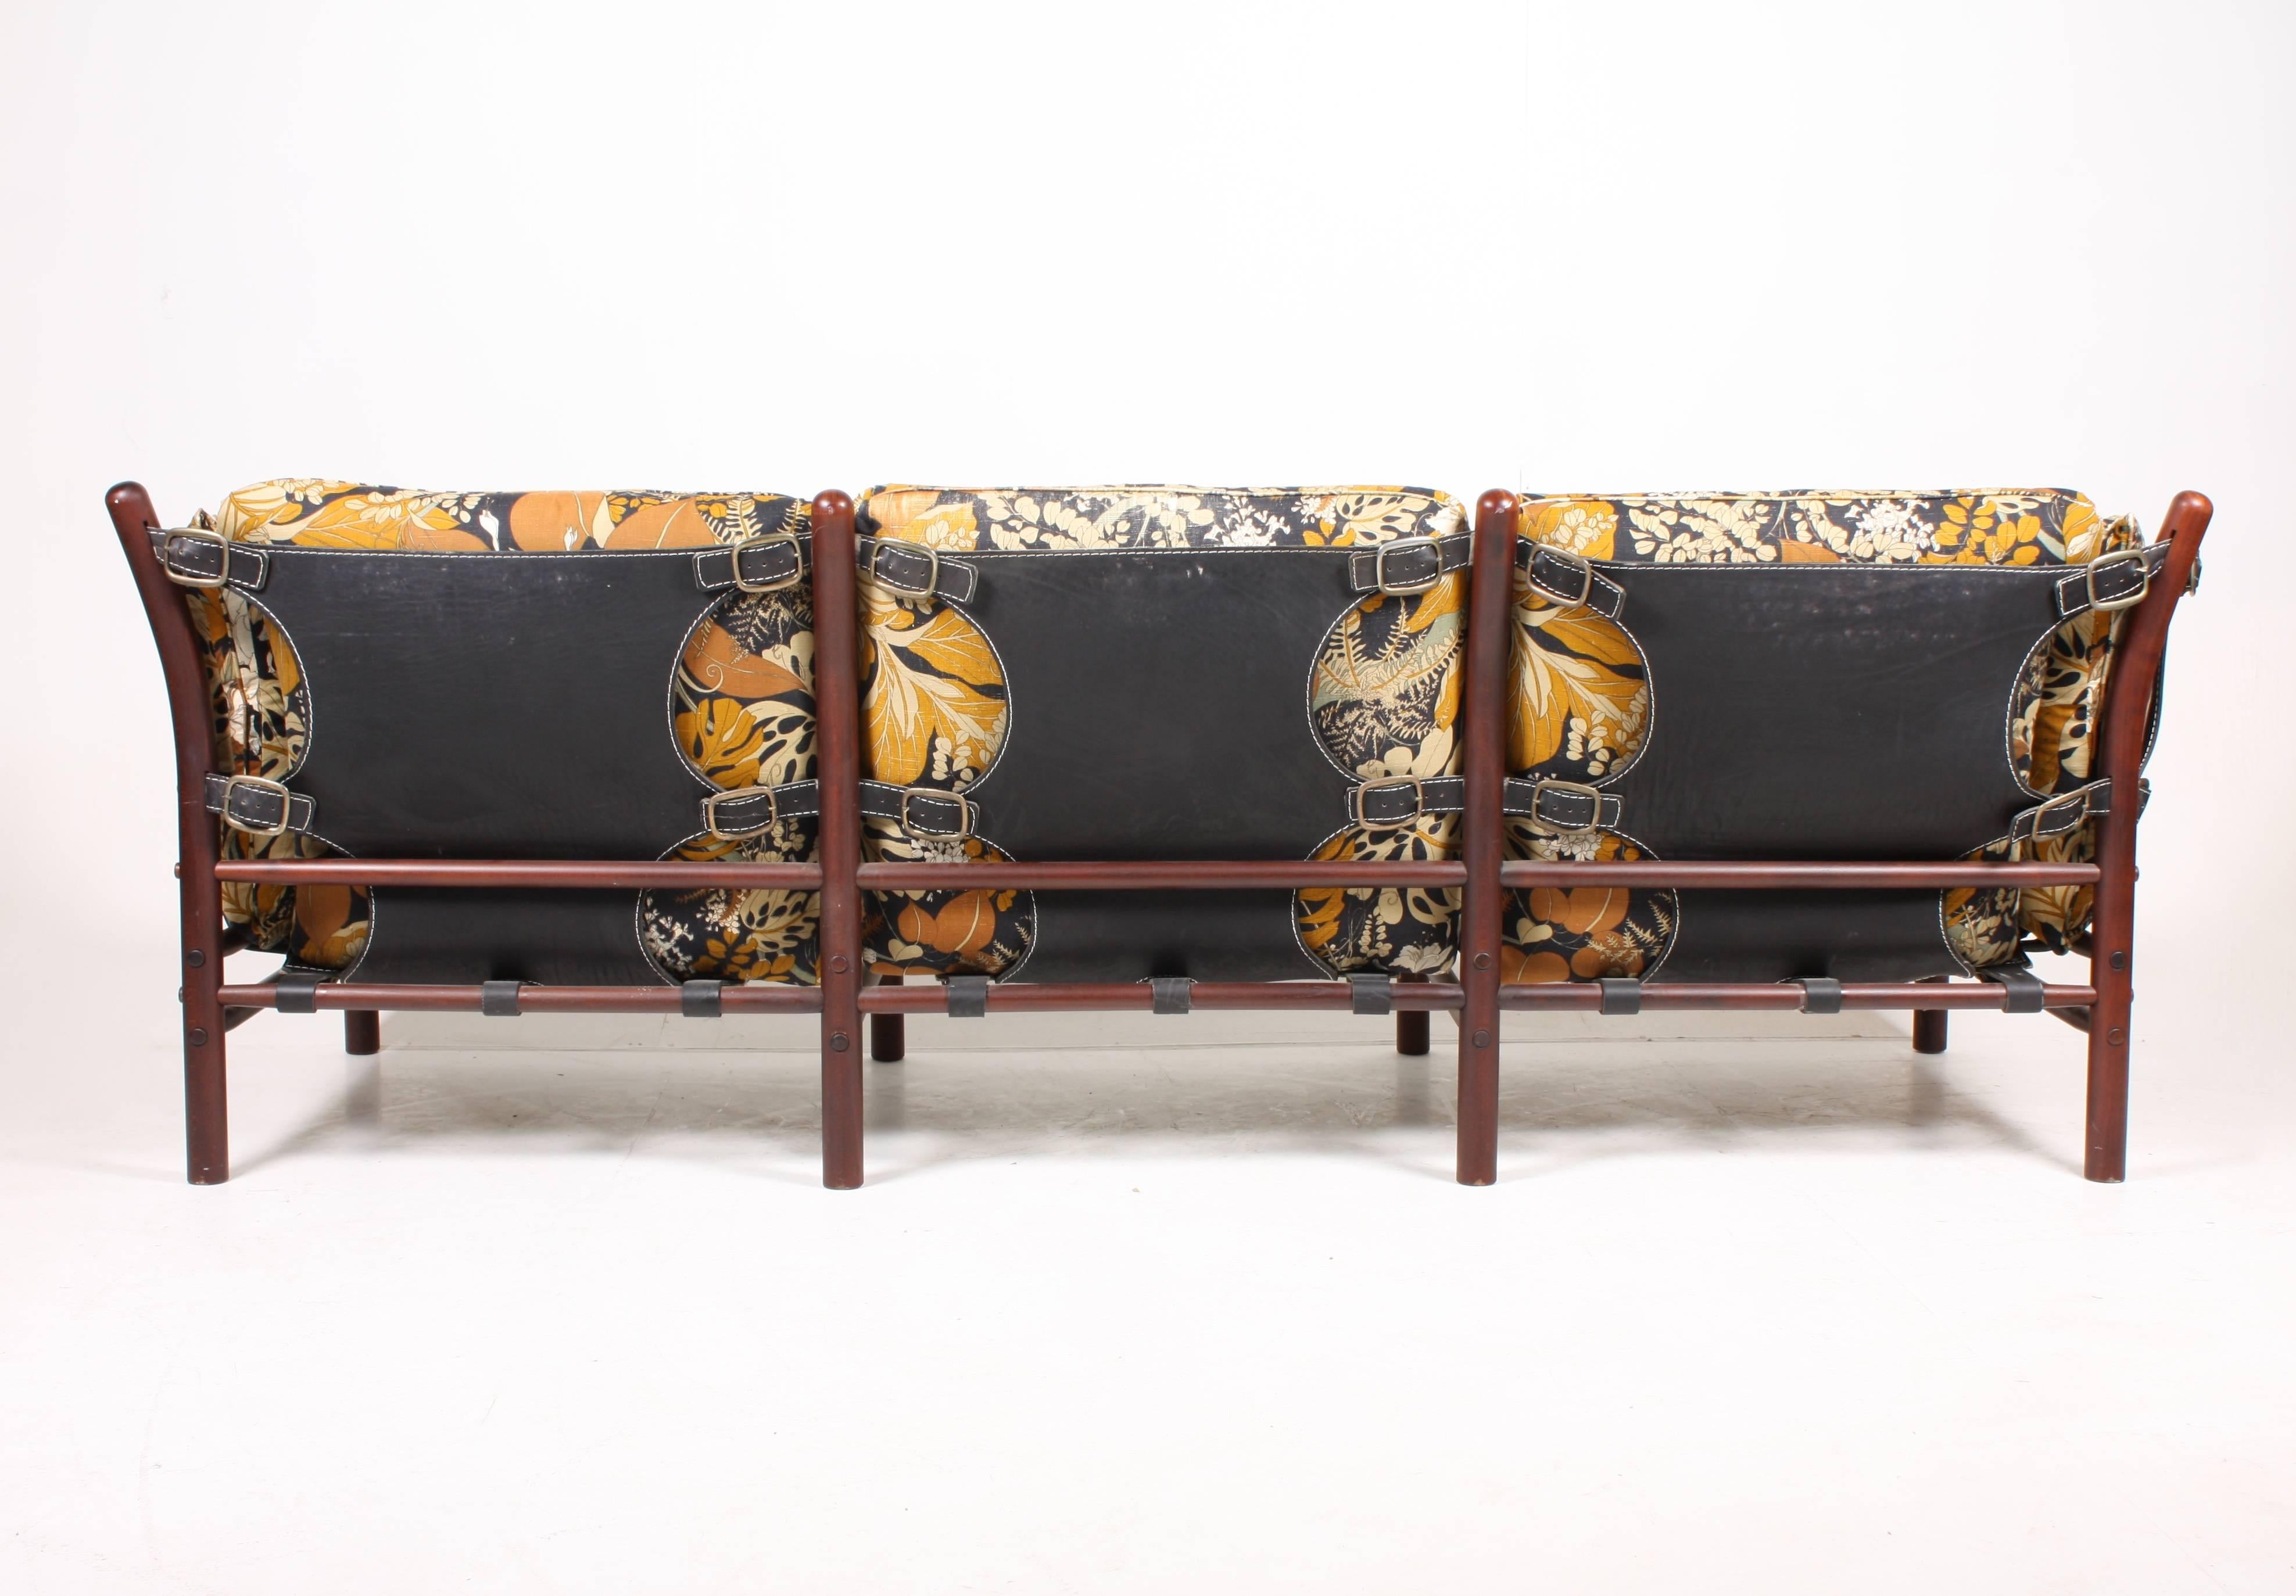 Three-seat sofa, model Ilona, designed by Arne Norell for Norell Møbel AB in the 1960s. This sofa has the rare floral print and support sides in leather. Made in Sweden. Great original condition.